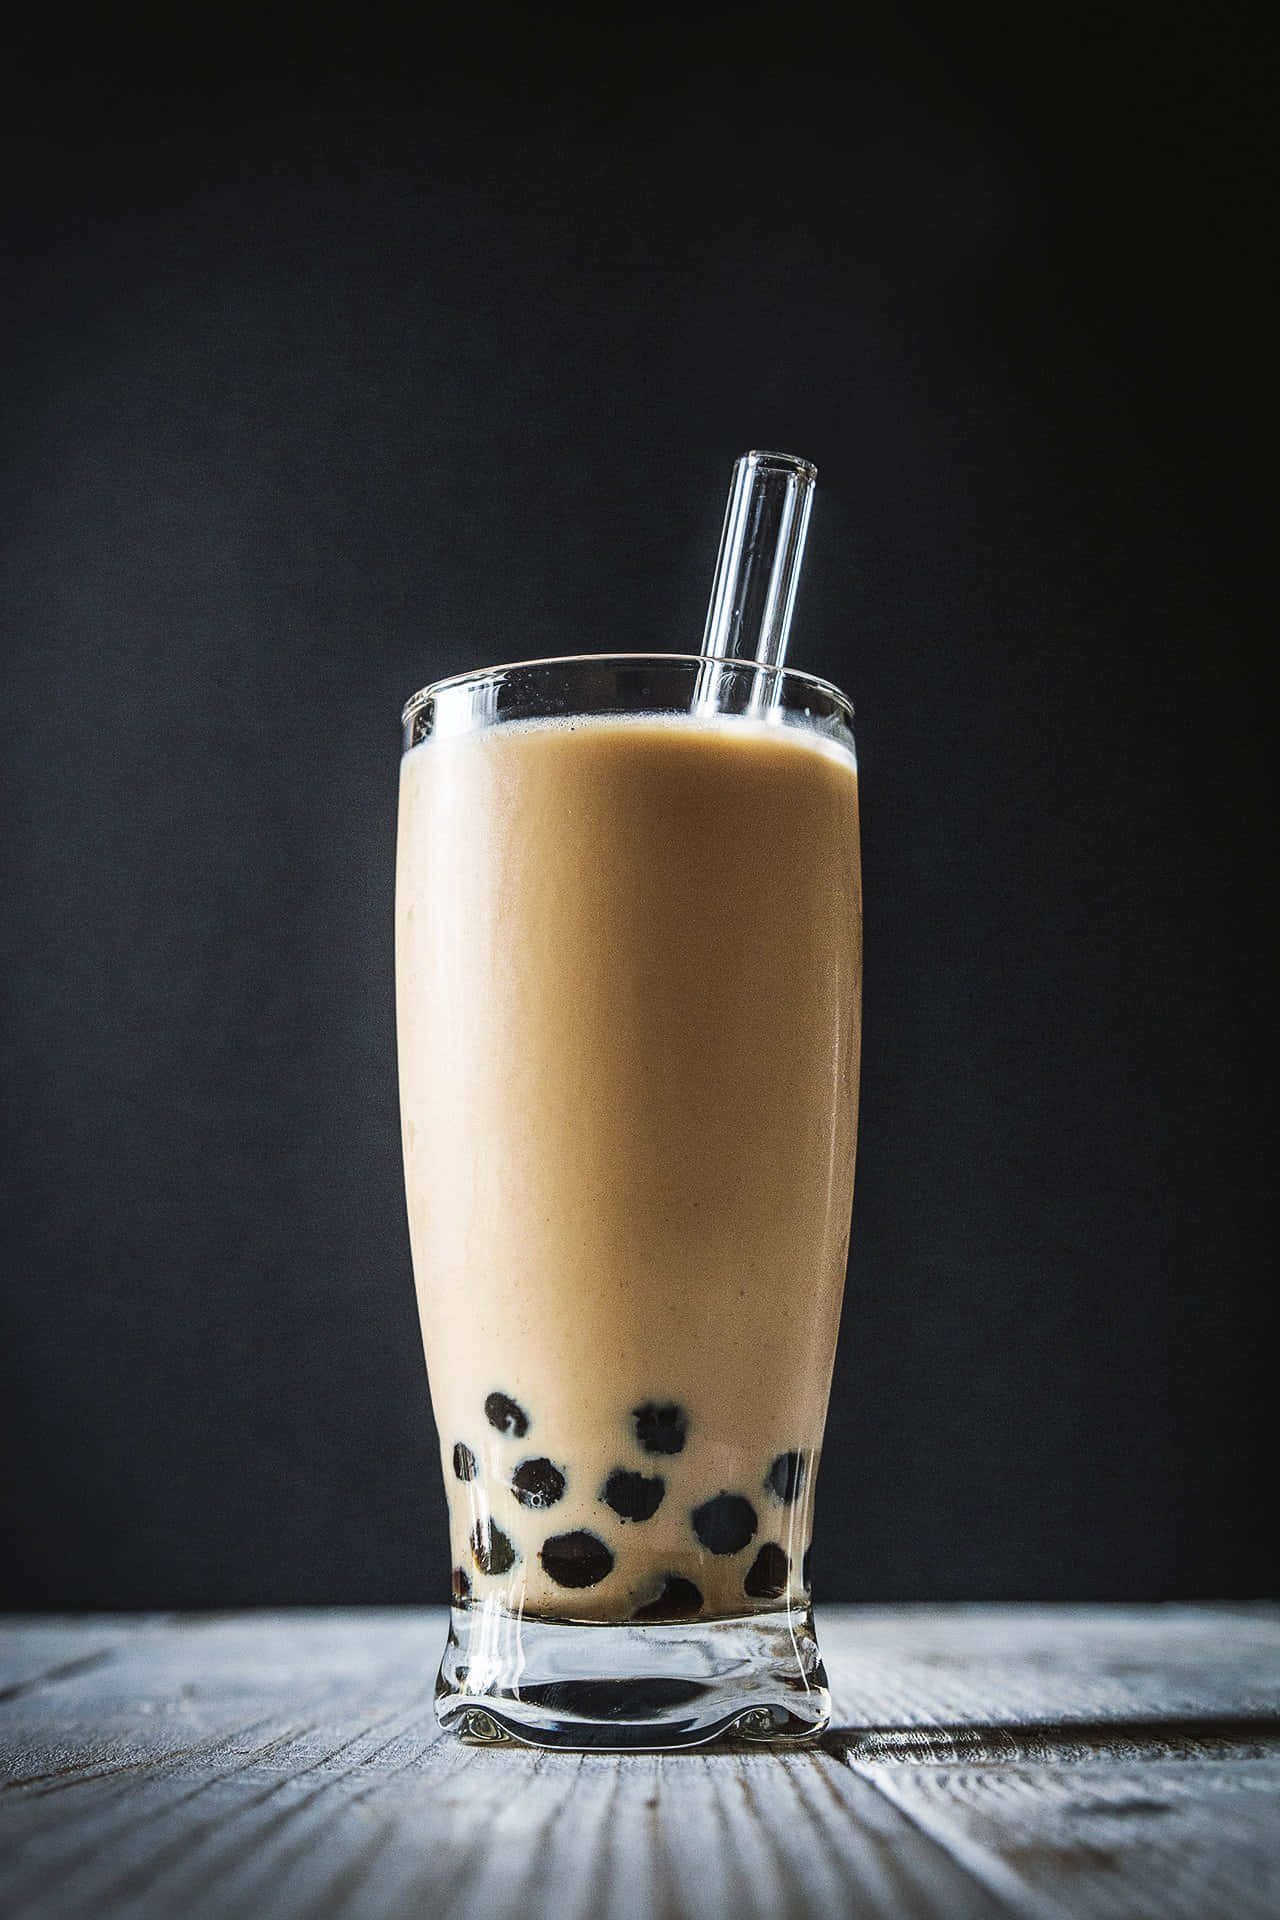 A Cup Of Bubble Tea With A Straw